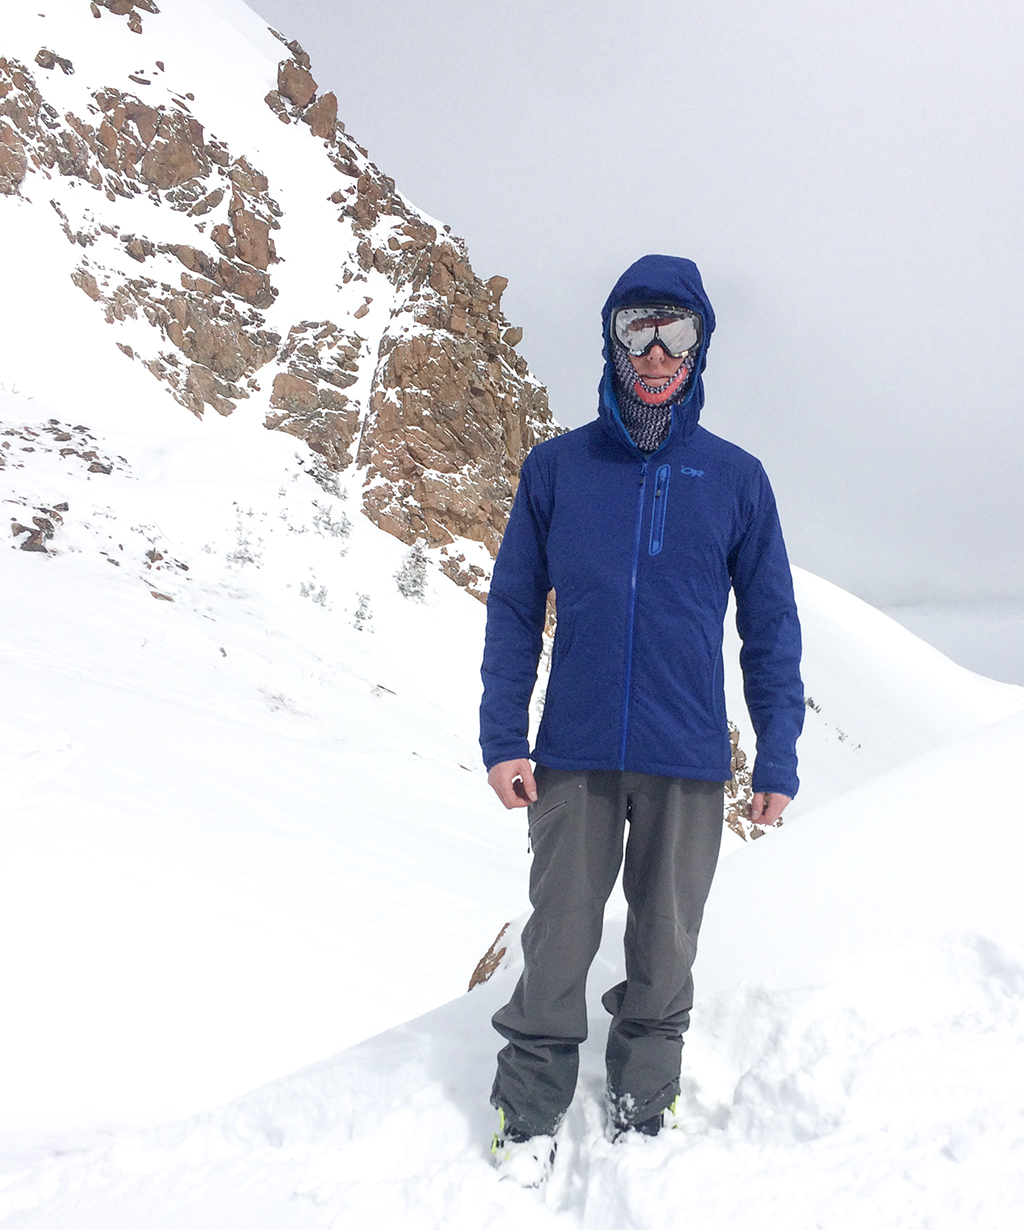 Sam Shaheen reviews the Outdoor Research Ascendant Jacket for Blister Gear Review.